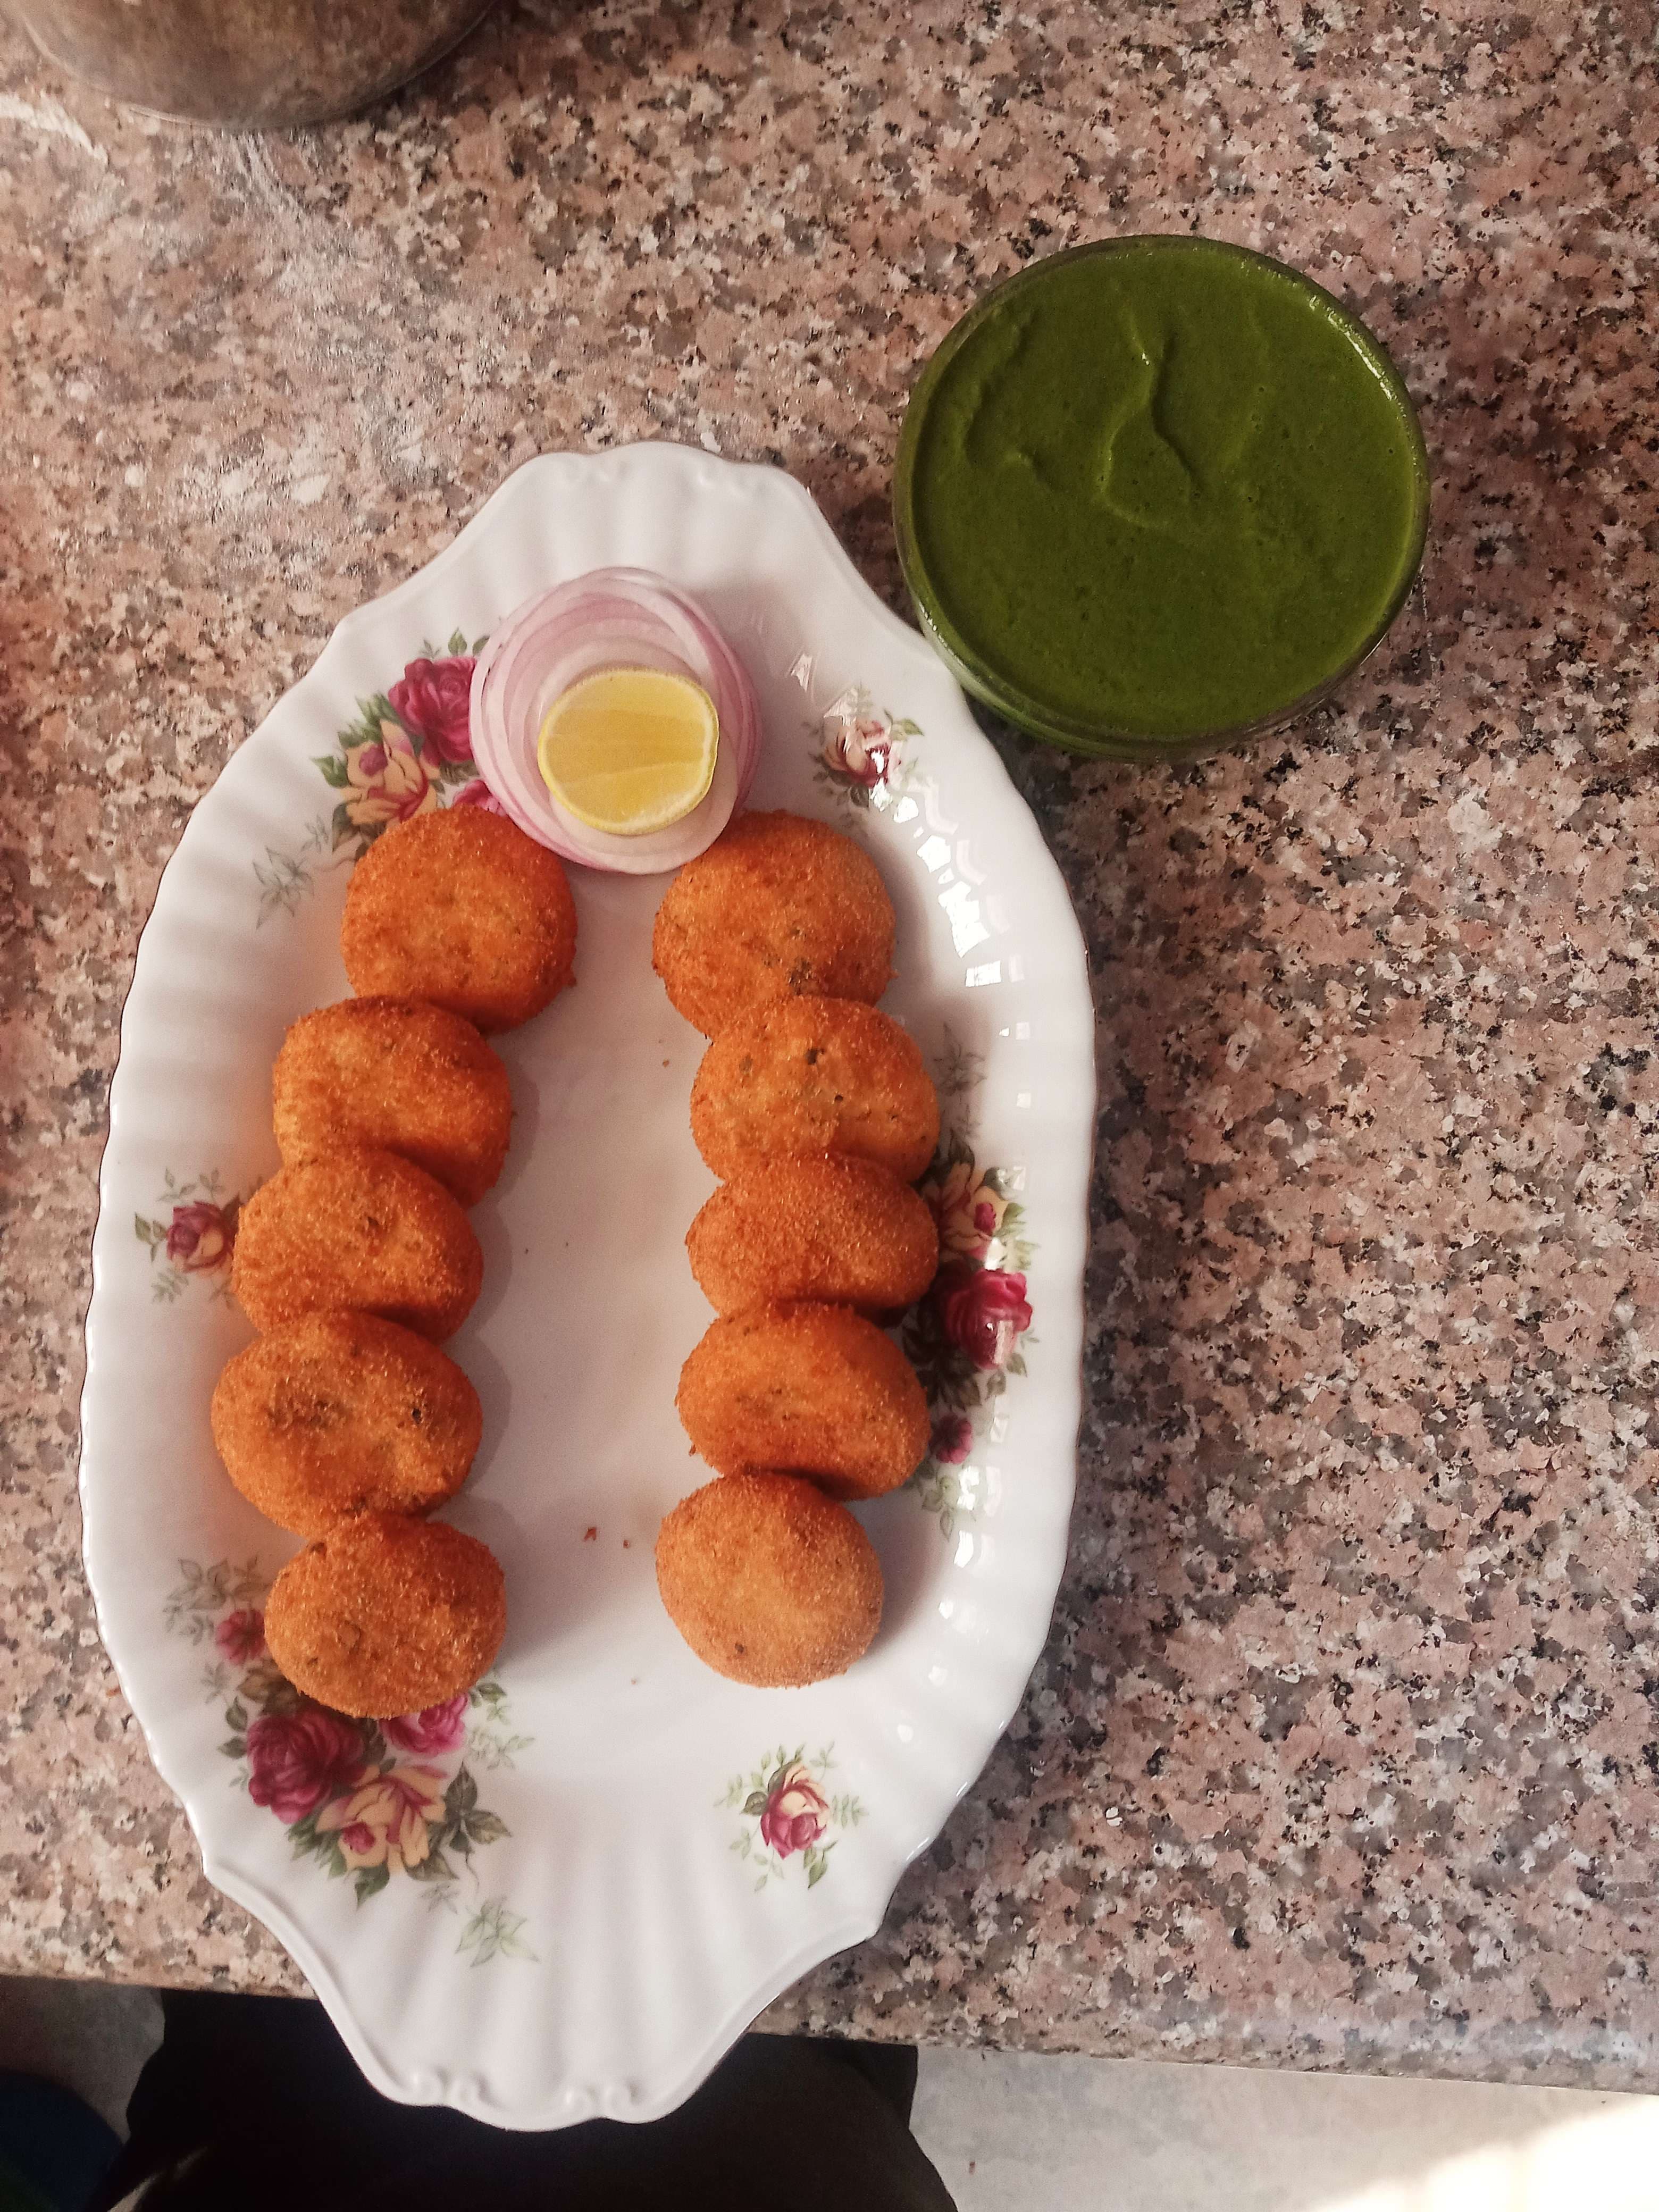 Tasty Dahi ke Kebab cooked by COOX chefs cooks during occasions parties events at home